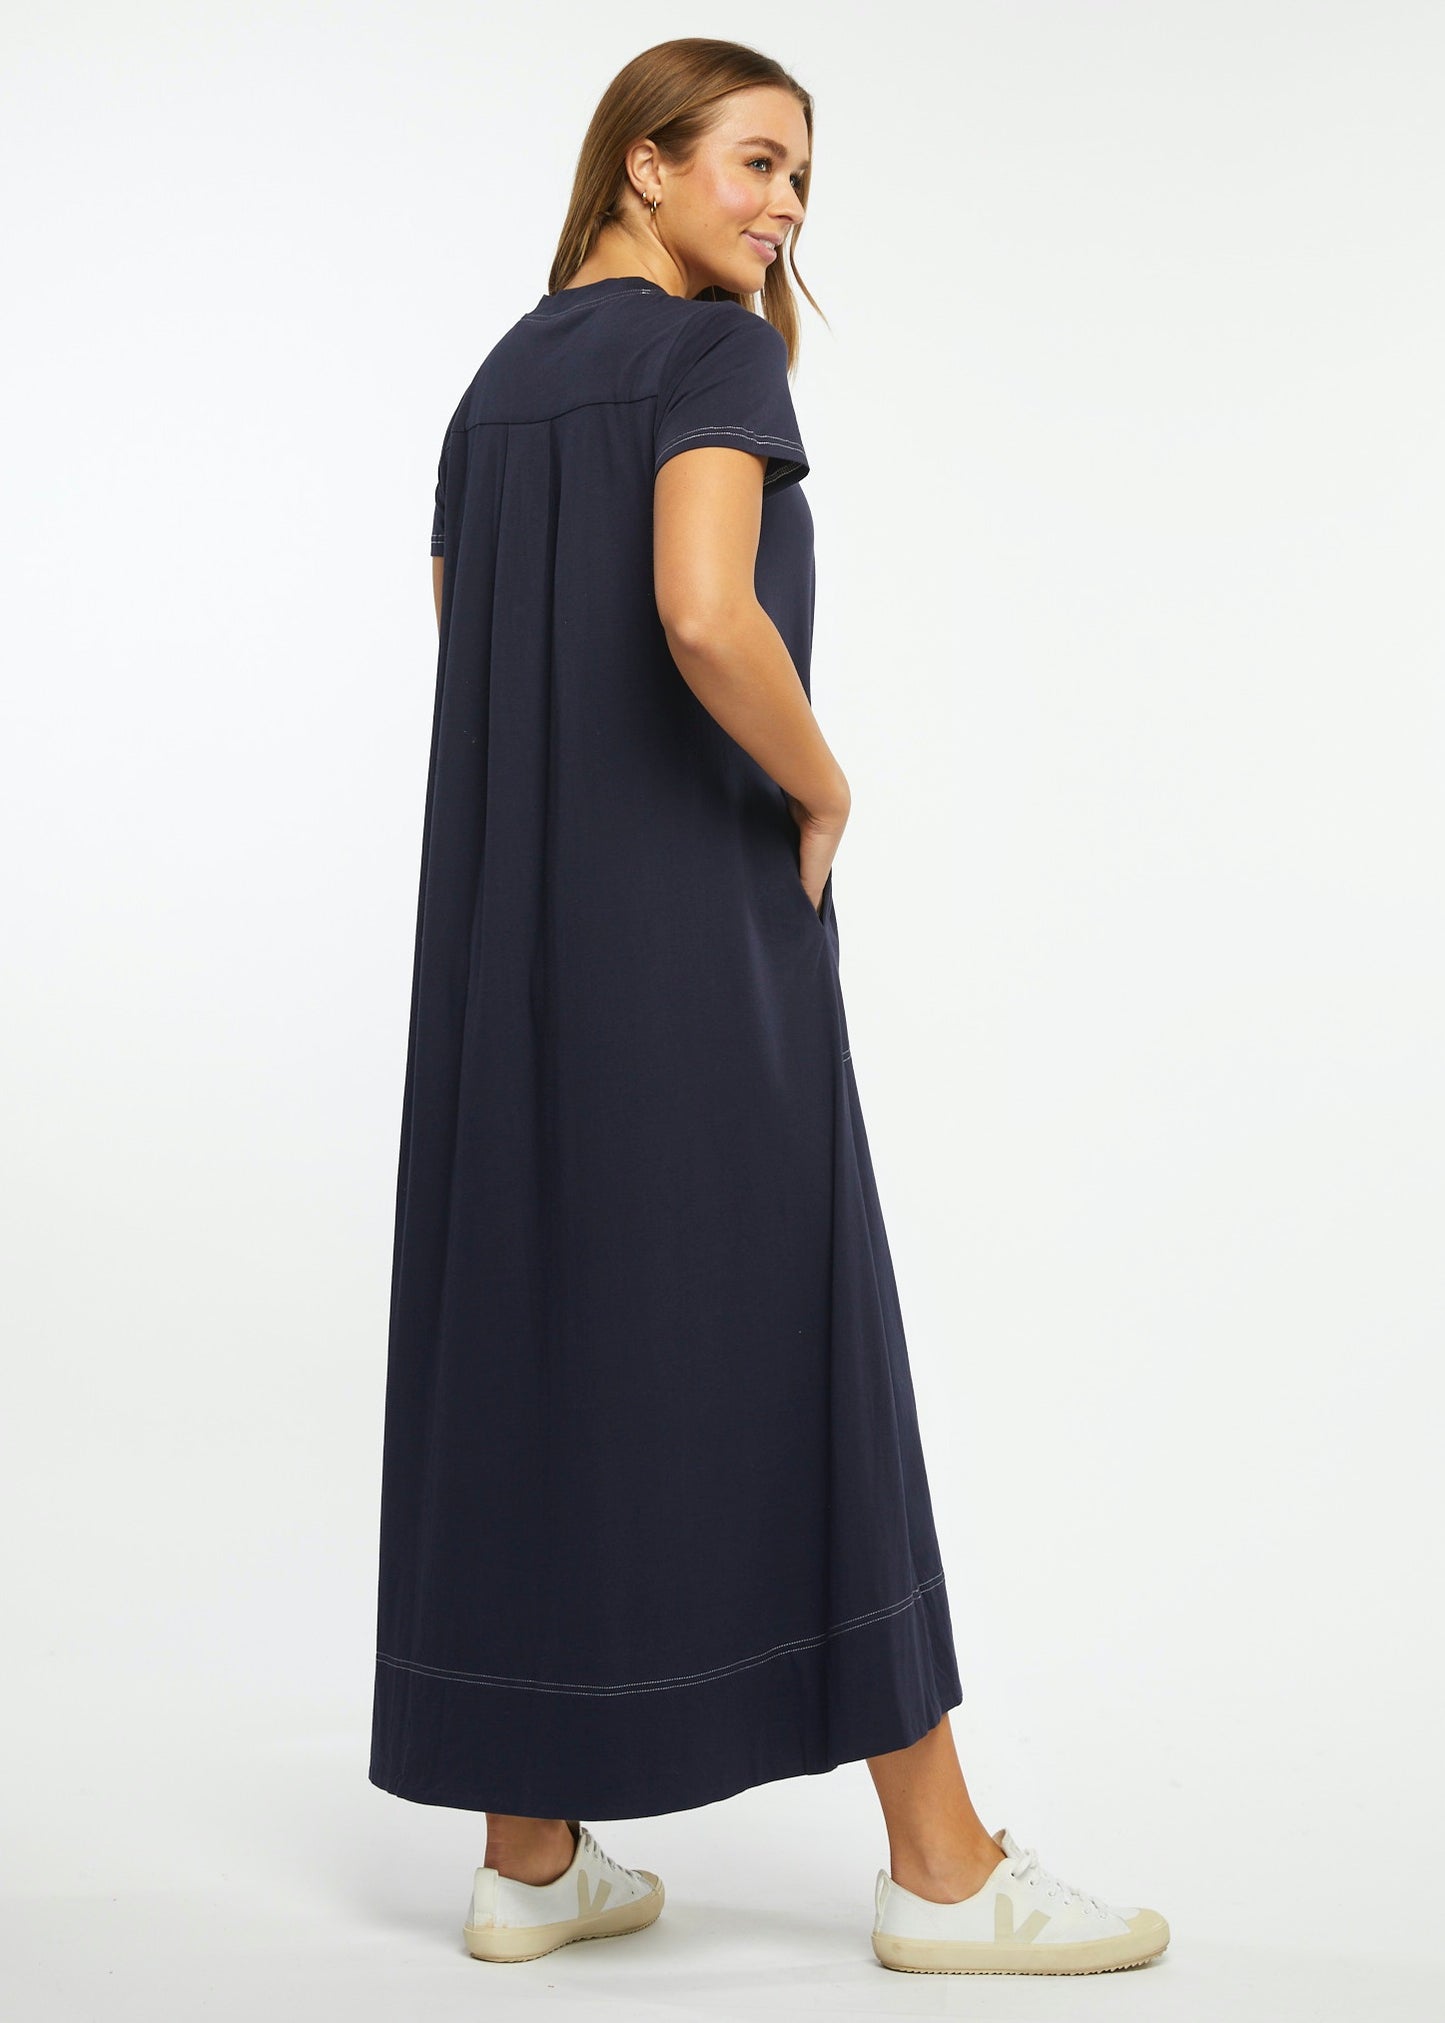 T-Shirt Dress by Zaket and Plover